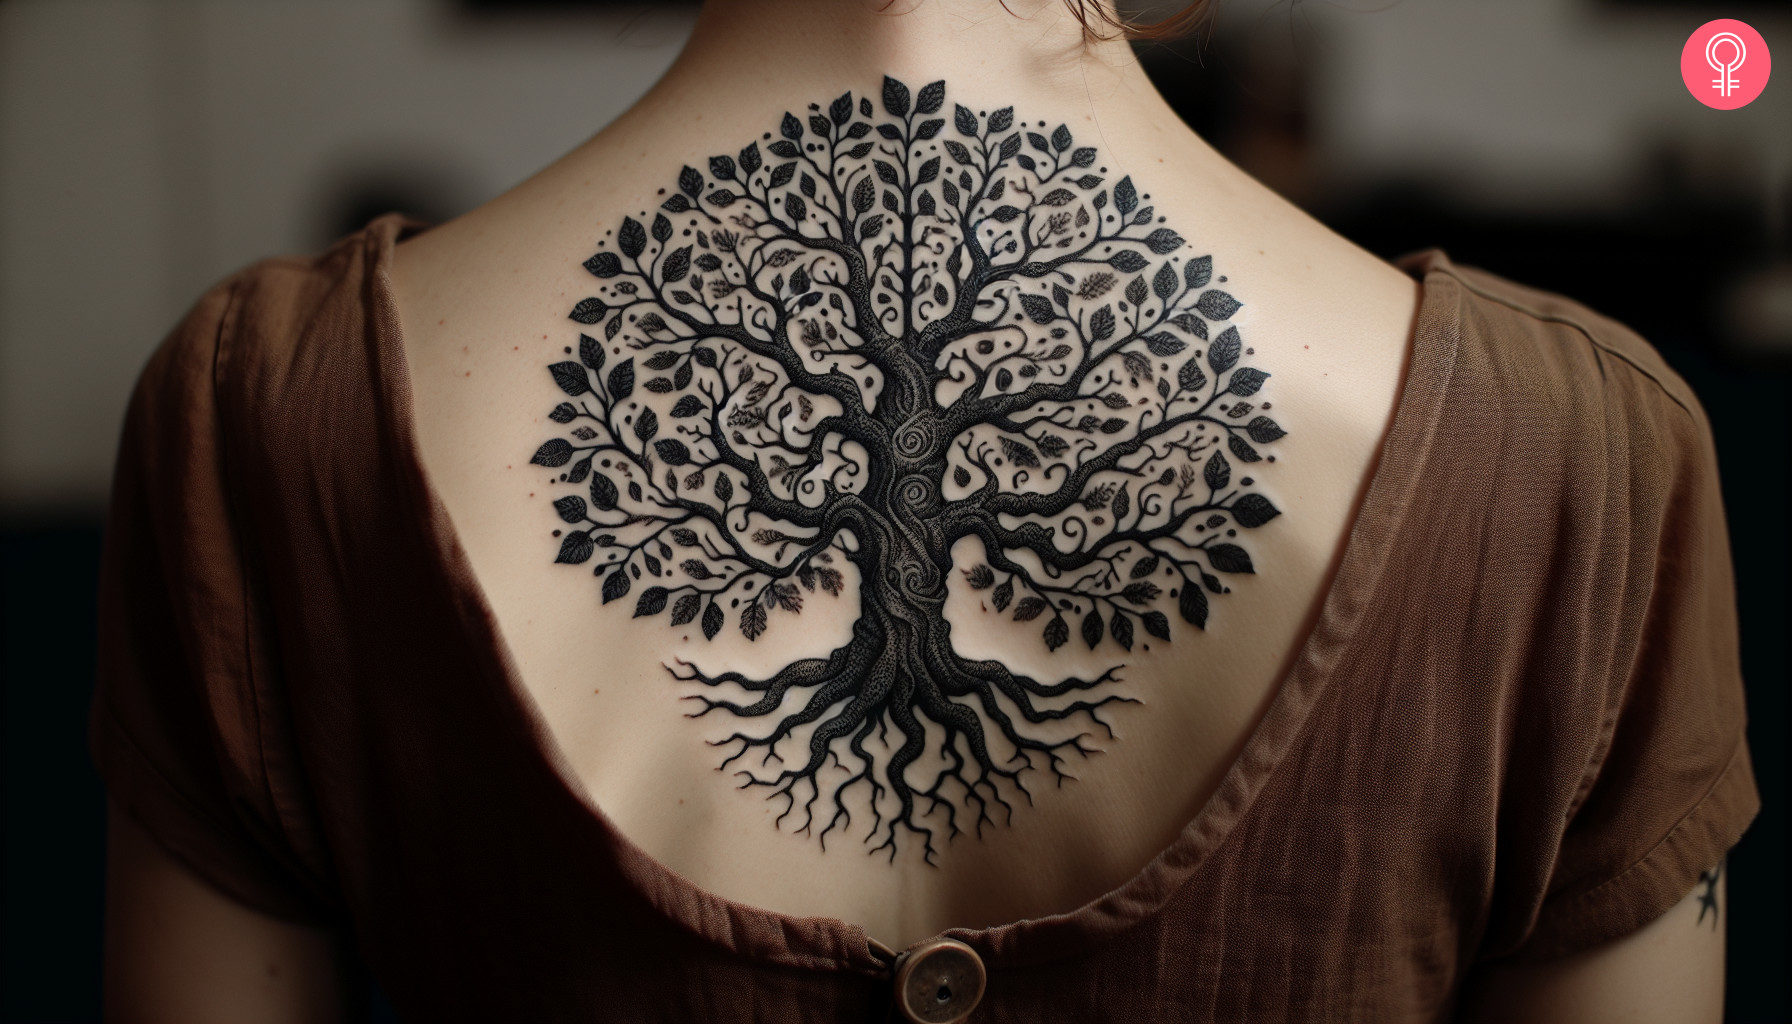 A woman flaunting an oak tree tattoo on the back